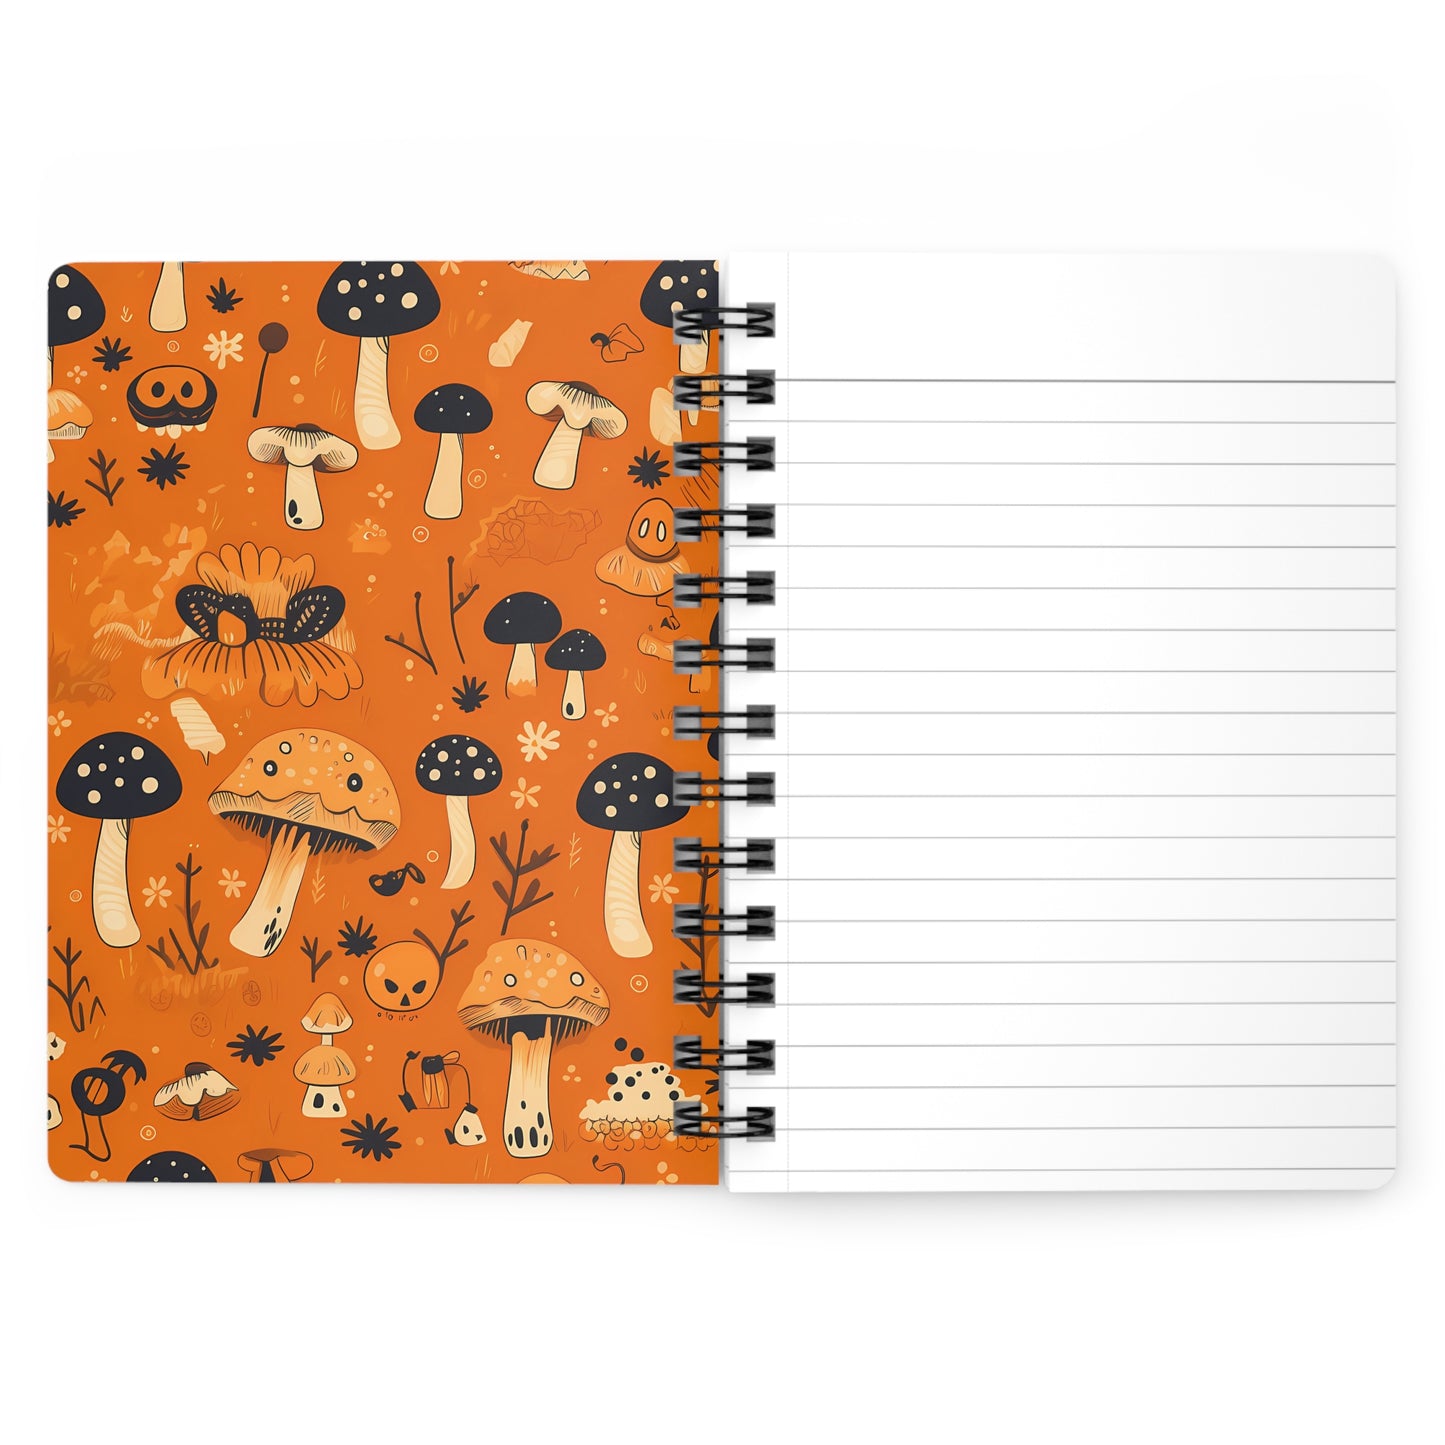 Orange Halloween Mushrooms Spiral Bound Notebook | Lined Pages | Grimoire | Book of Shadows